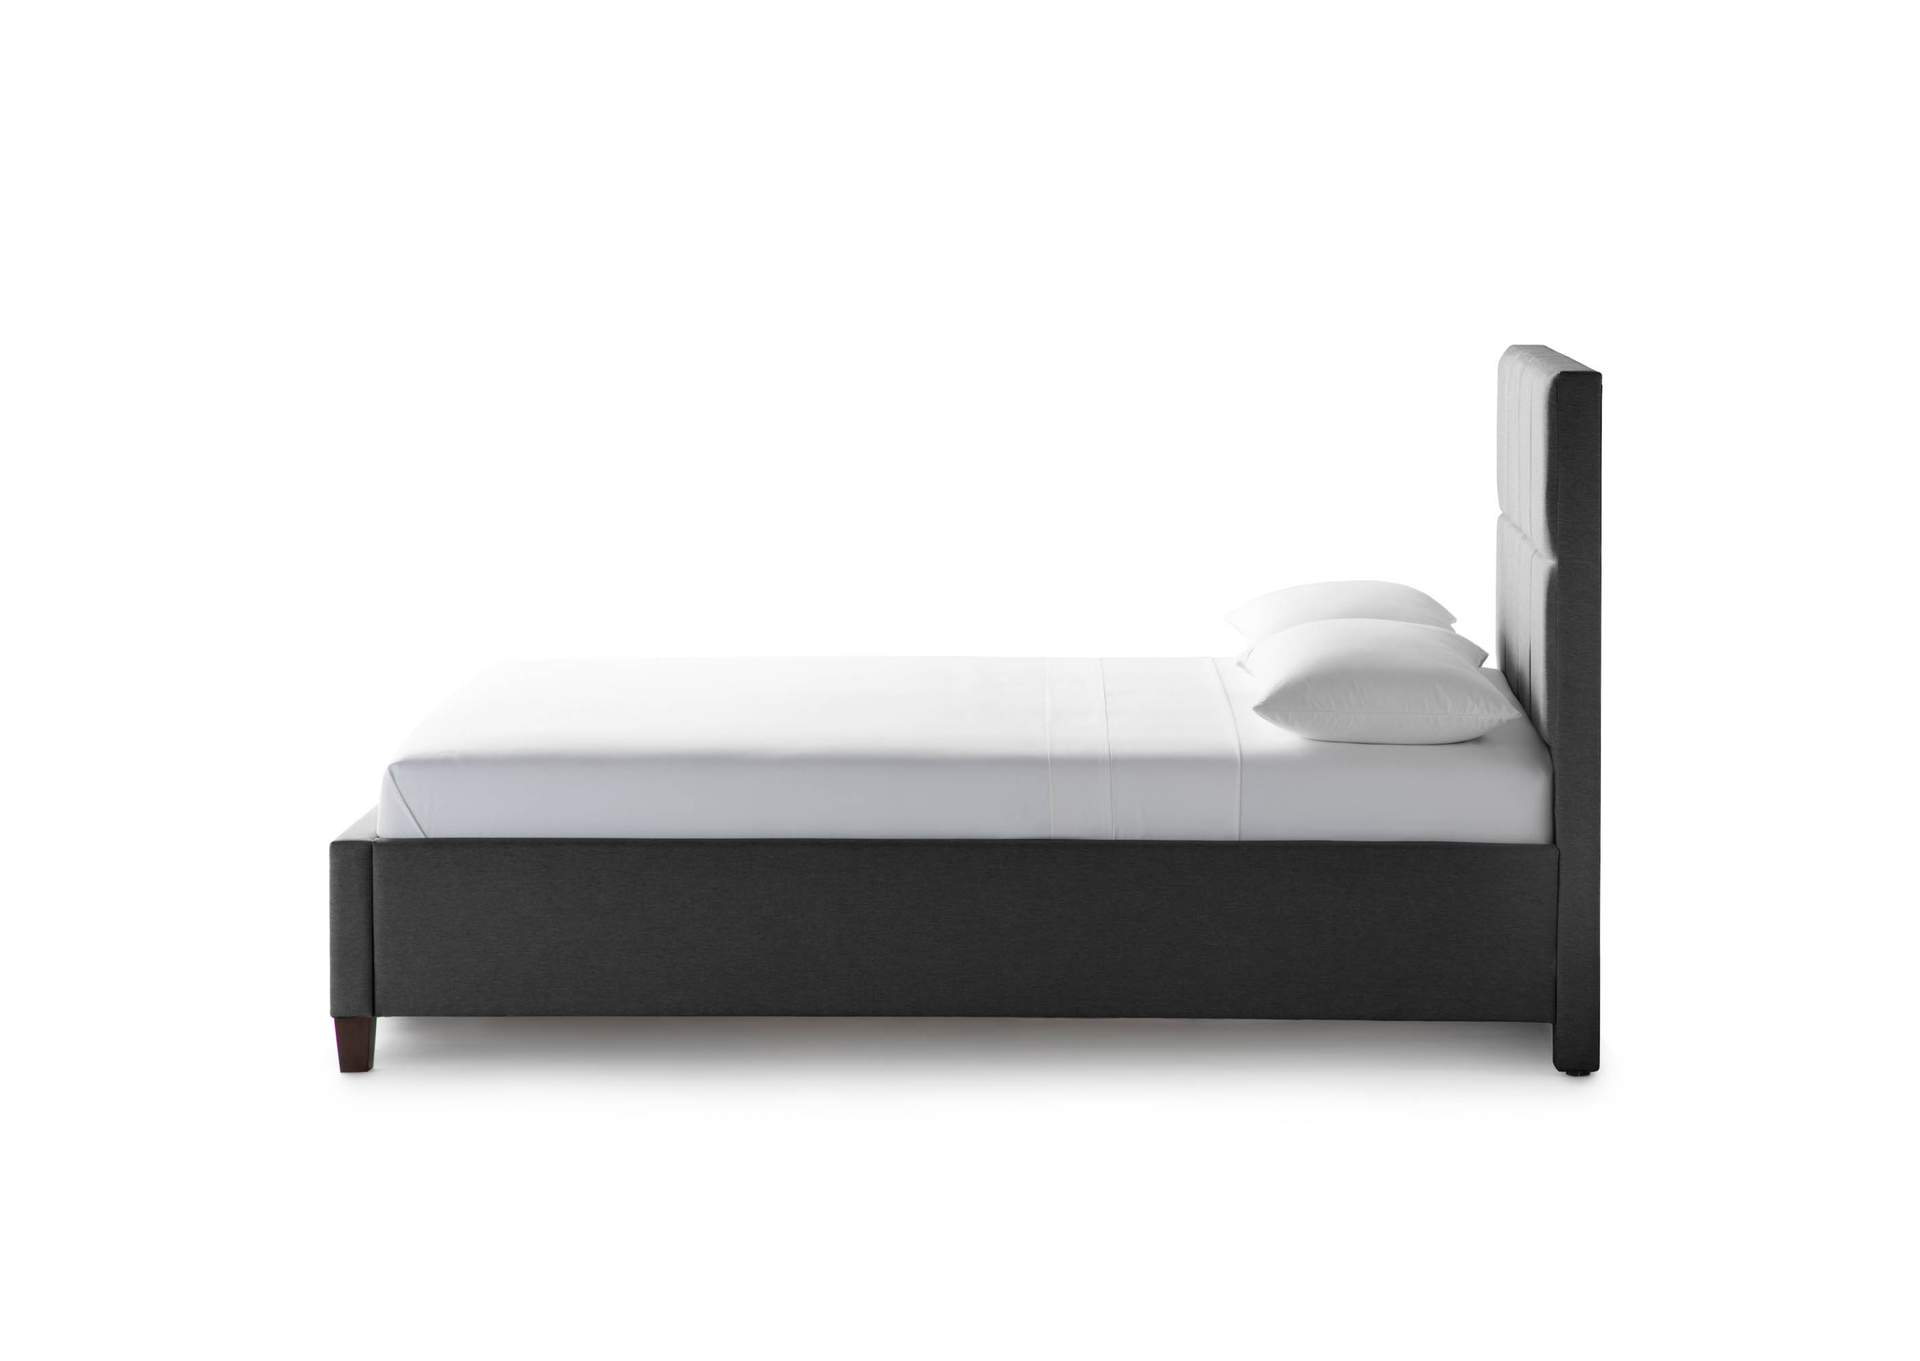 Malouf Charcoal Scoresby Upholstered King Bed,Malouf